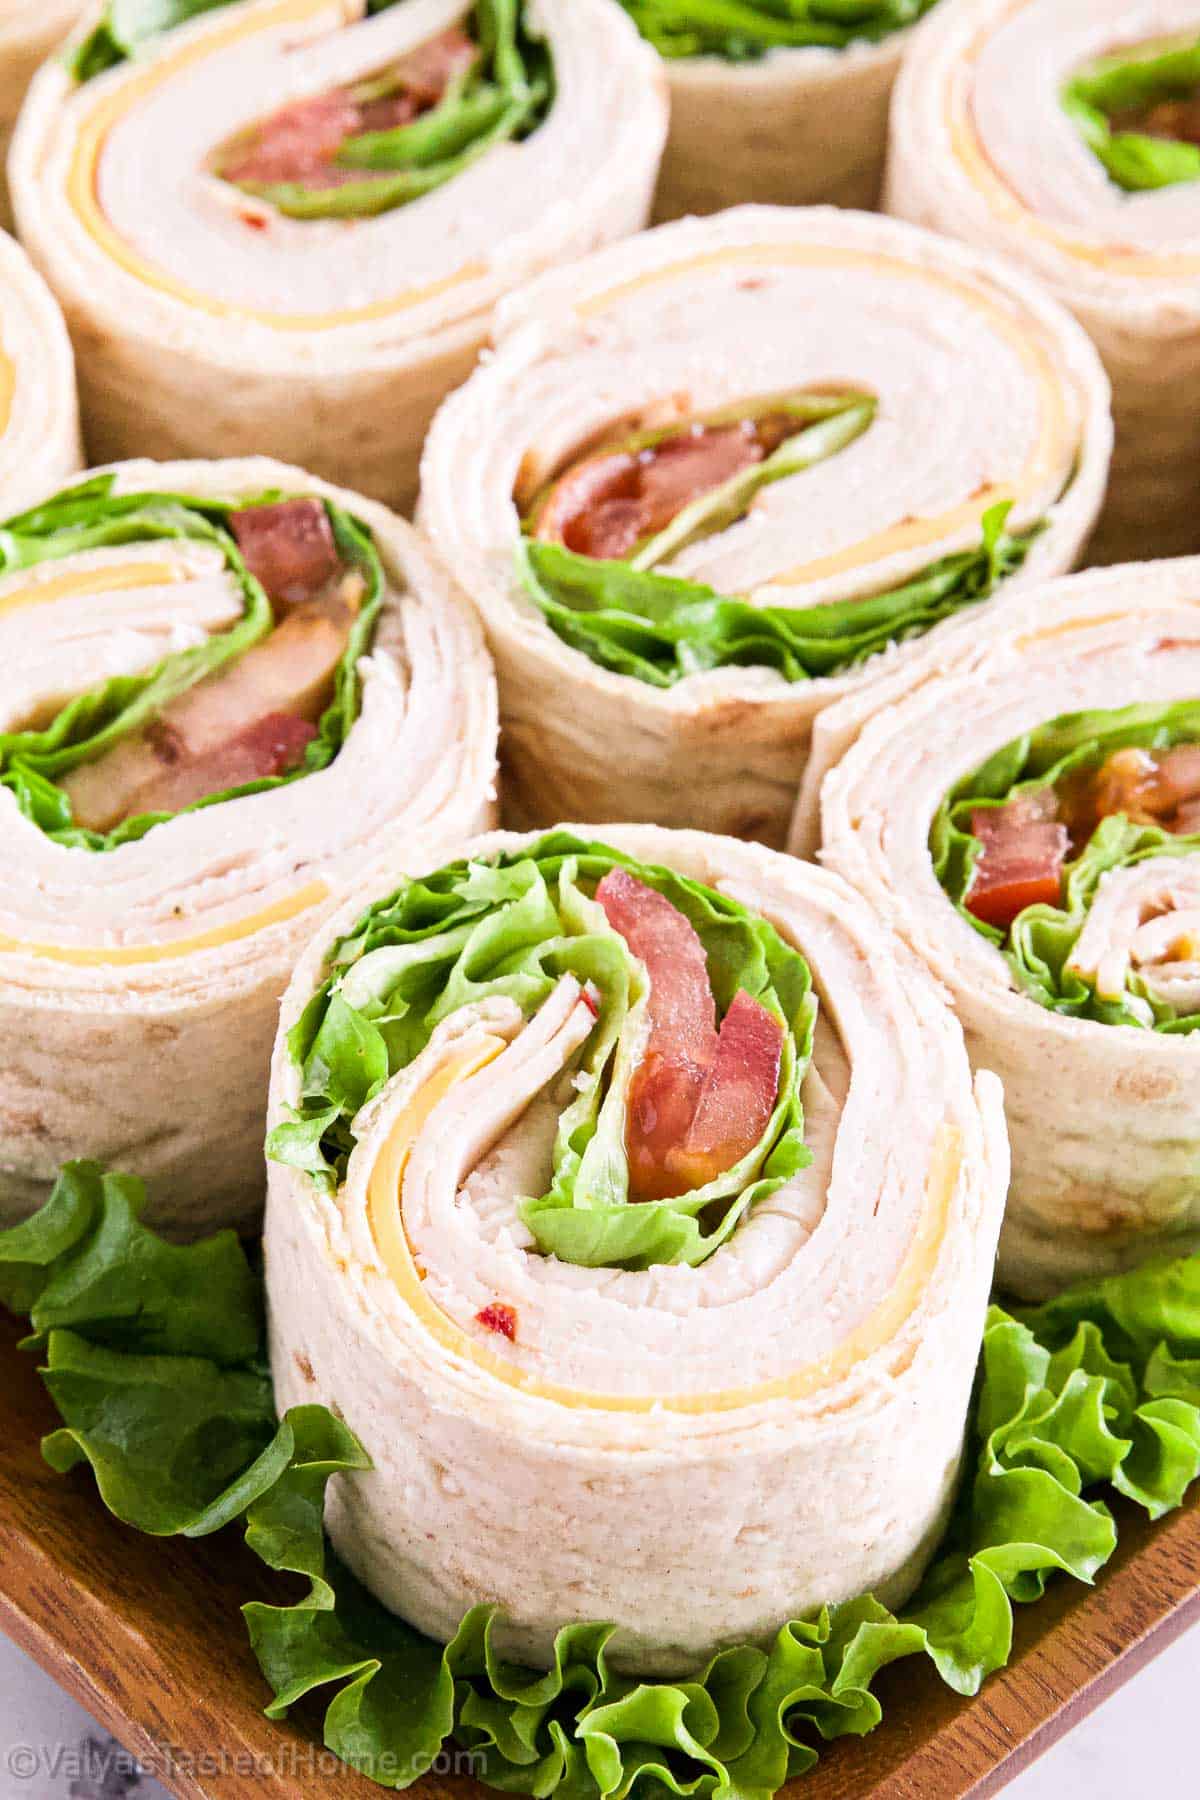 These Turkey Pinwheel Appetizers are great, and healthy snacks loaded with vitamins, protein, fiber, and low in fat. Plus, it’s a chance to get some veggies in, such as green leaf lettuce and tomato.